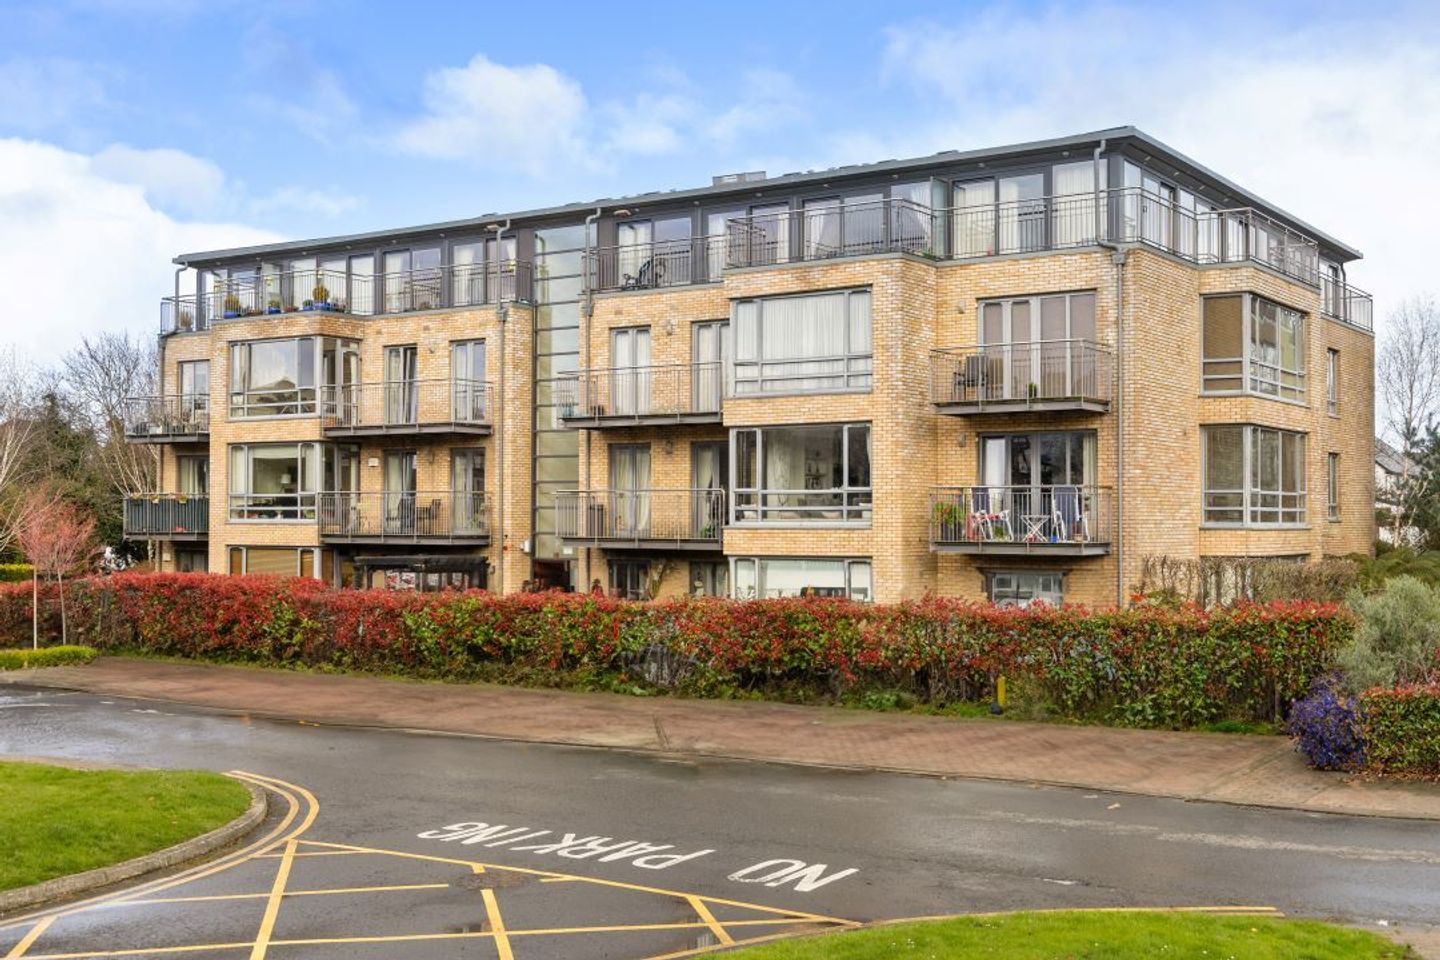 Apartment 89, Priory Court, Delgany, Co. Wicklow, A63Y079